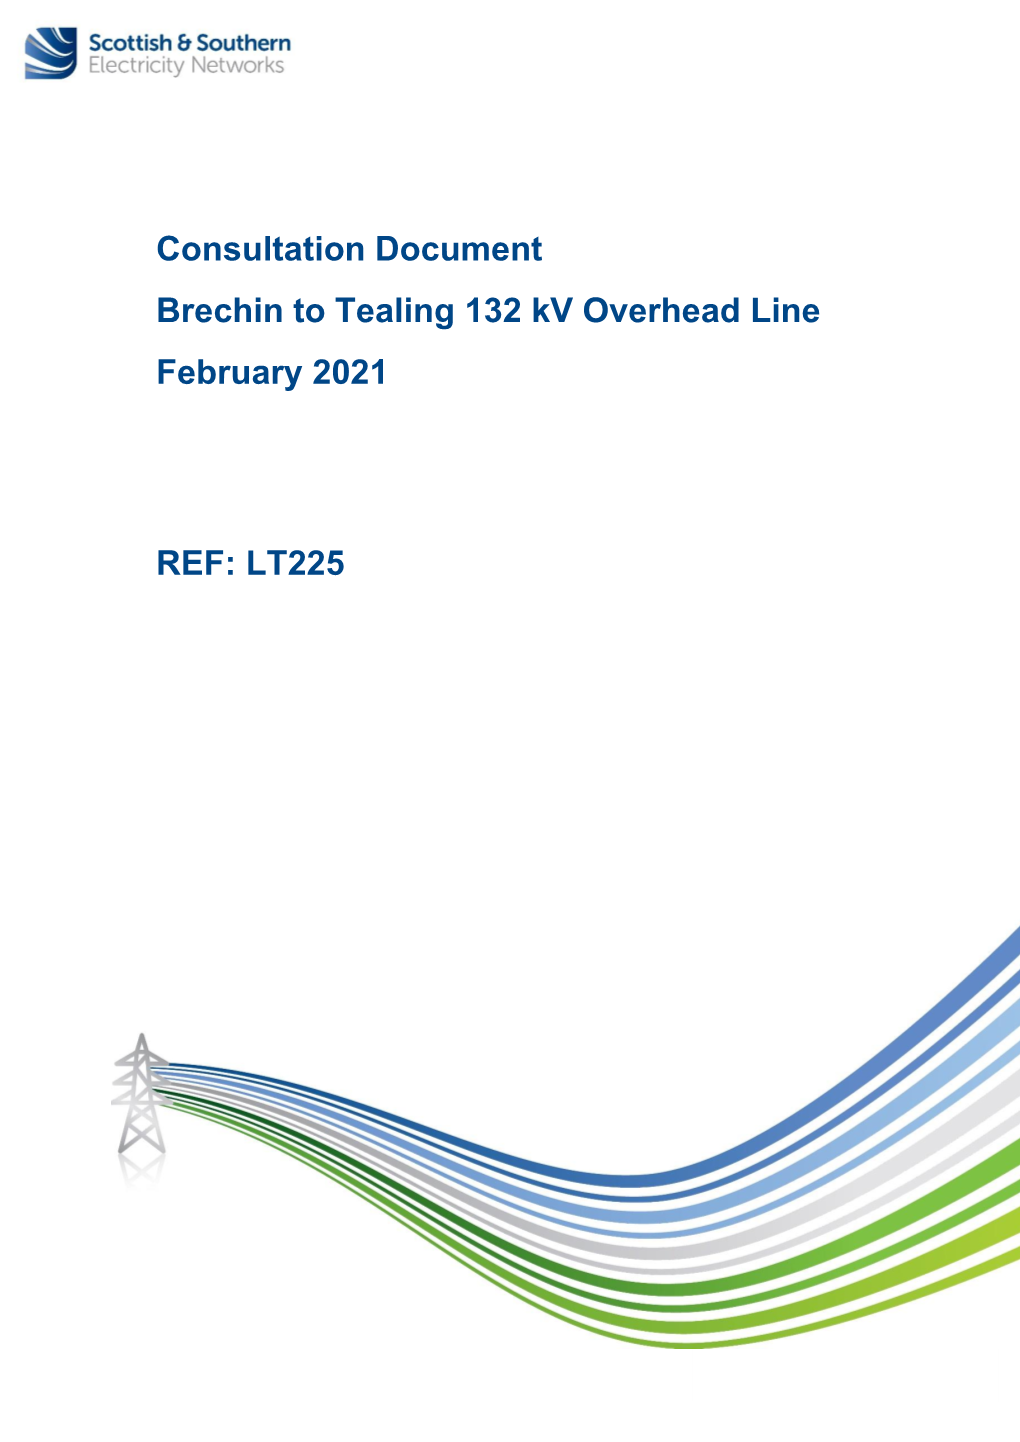 Consultation Document Brechin to Tealing 132 Kv Overhead Line February 2021